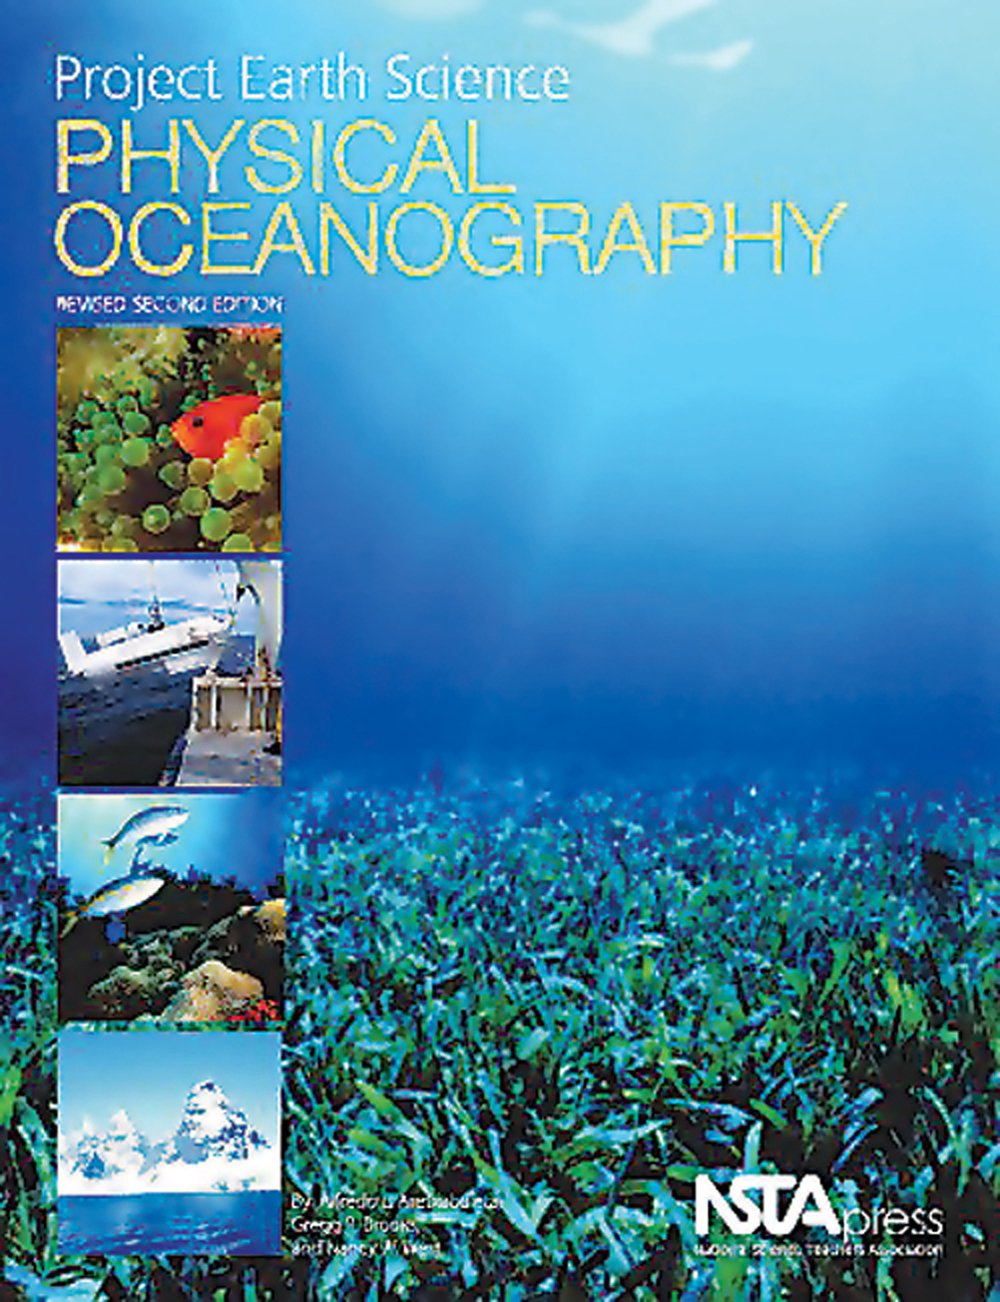 Project Earth Science: Physical Oceanography (Revised 2nd Edition)